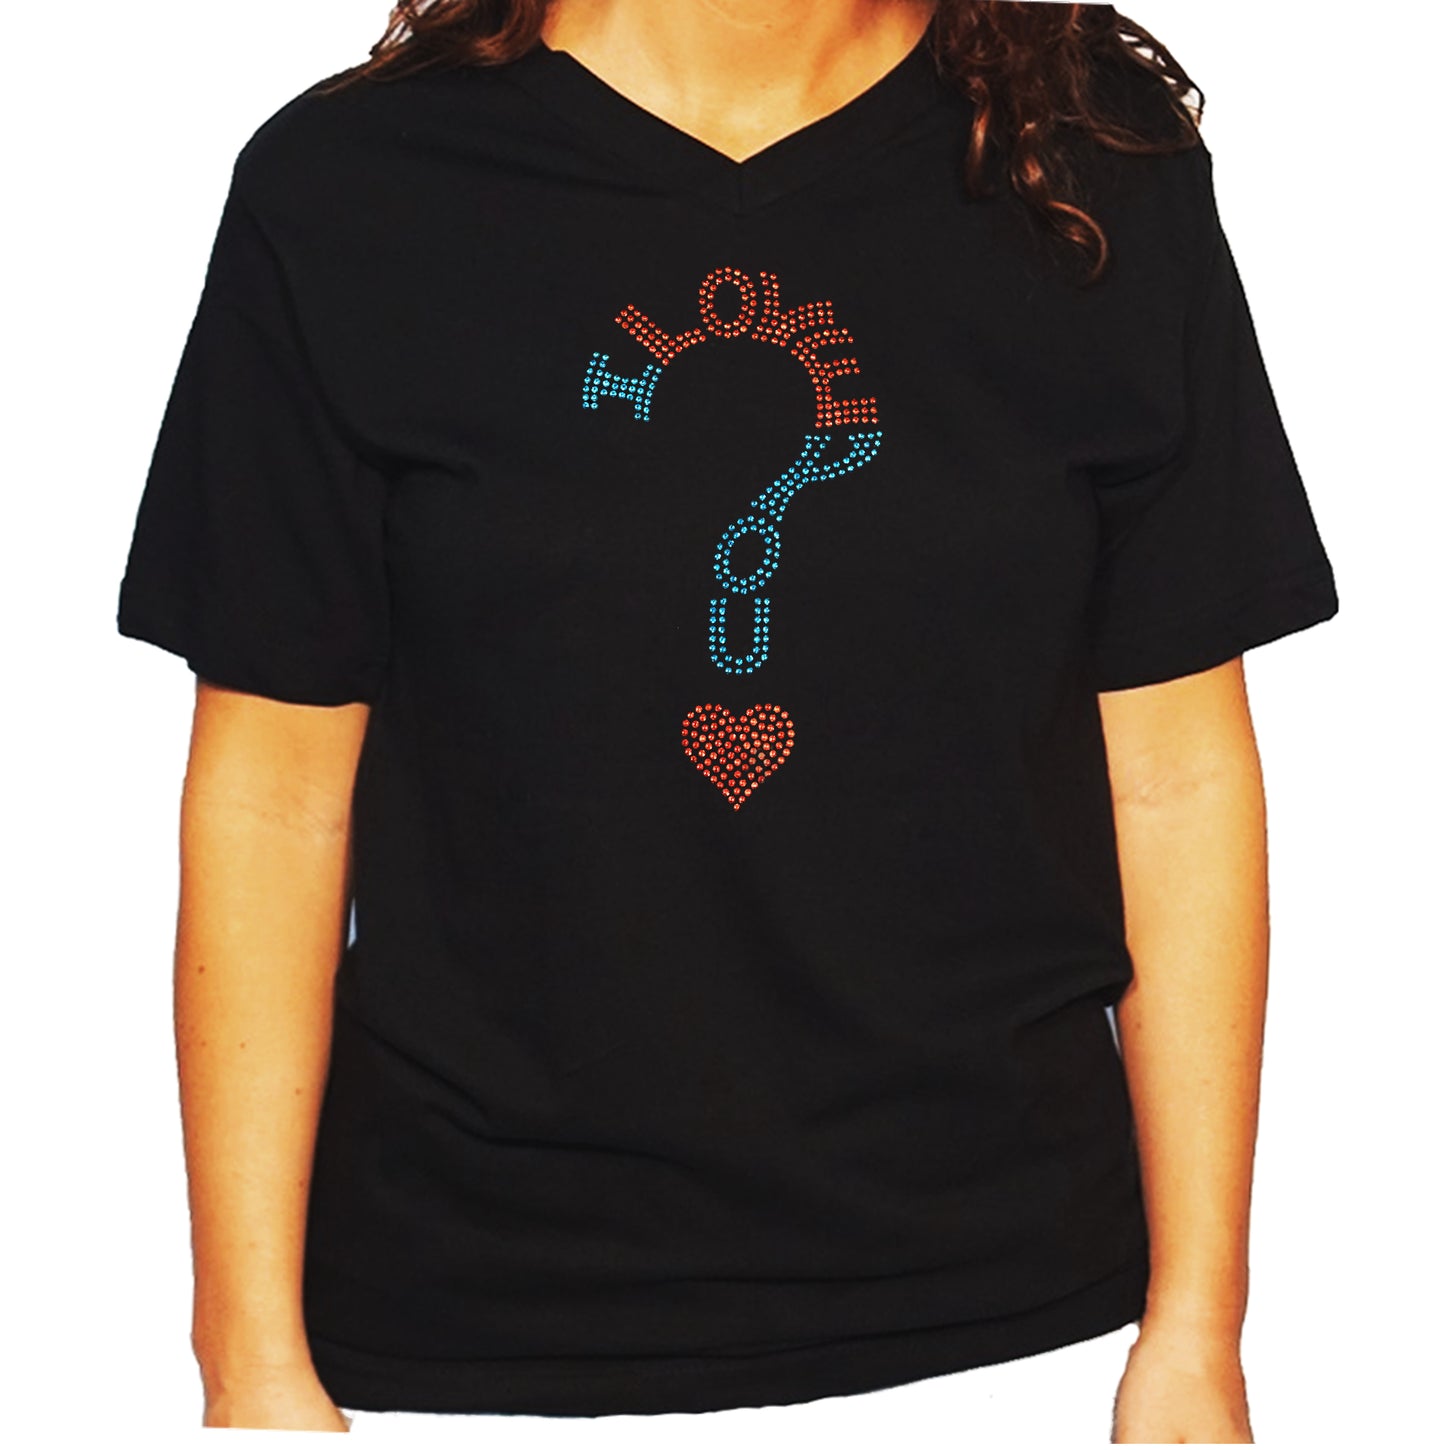 Women's / Unisex T-Shirt with I Love you in Rhinestuds